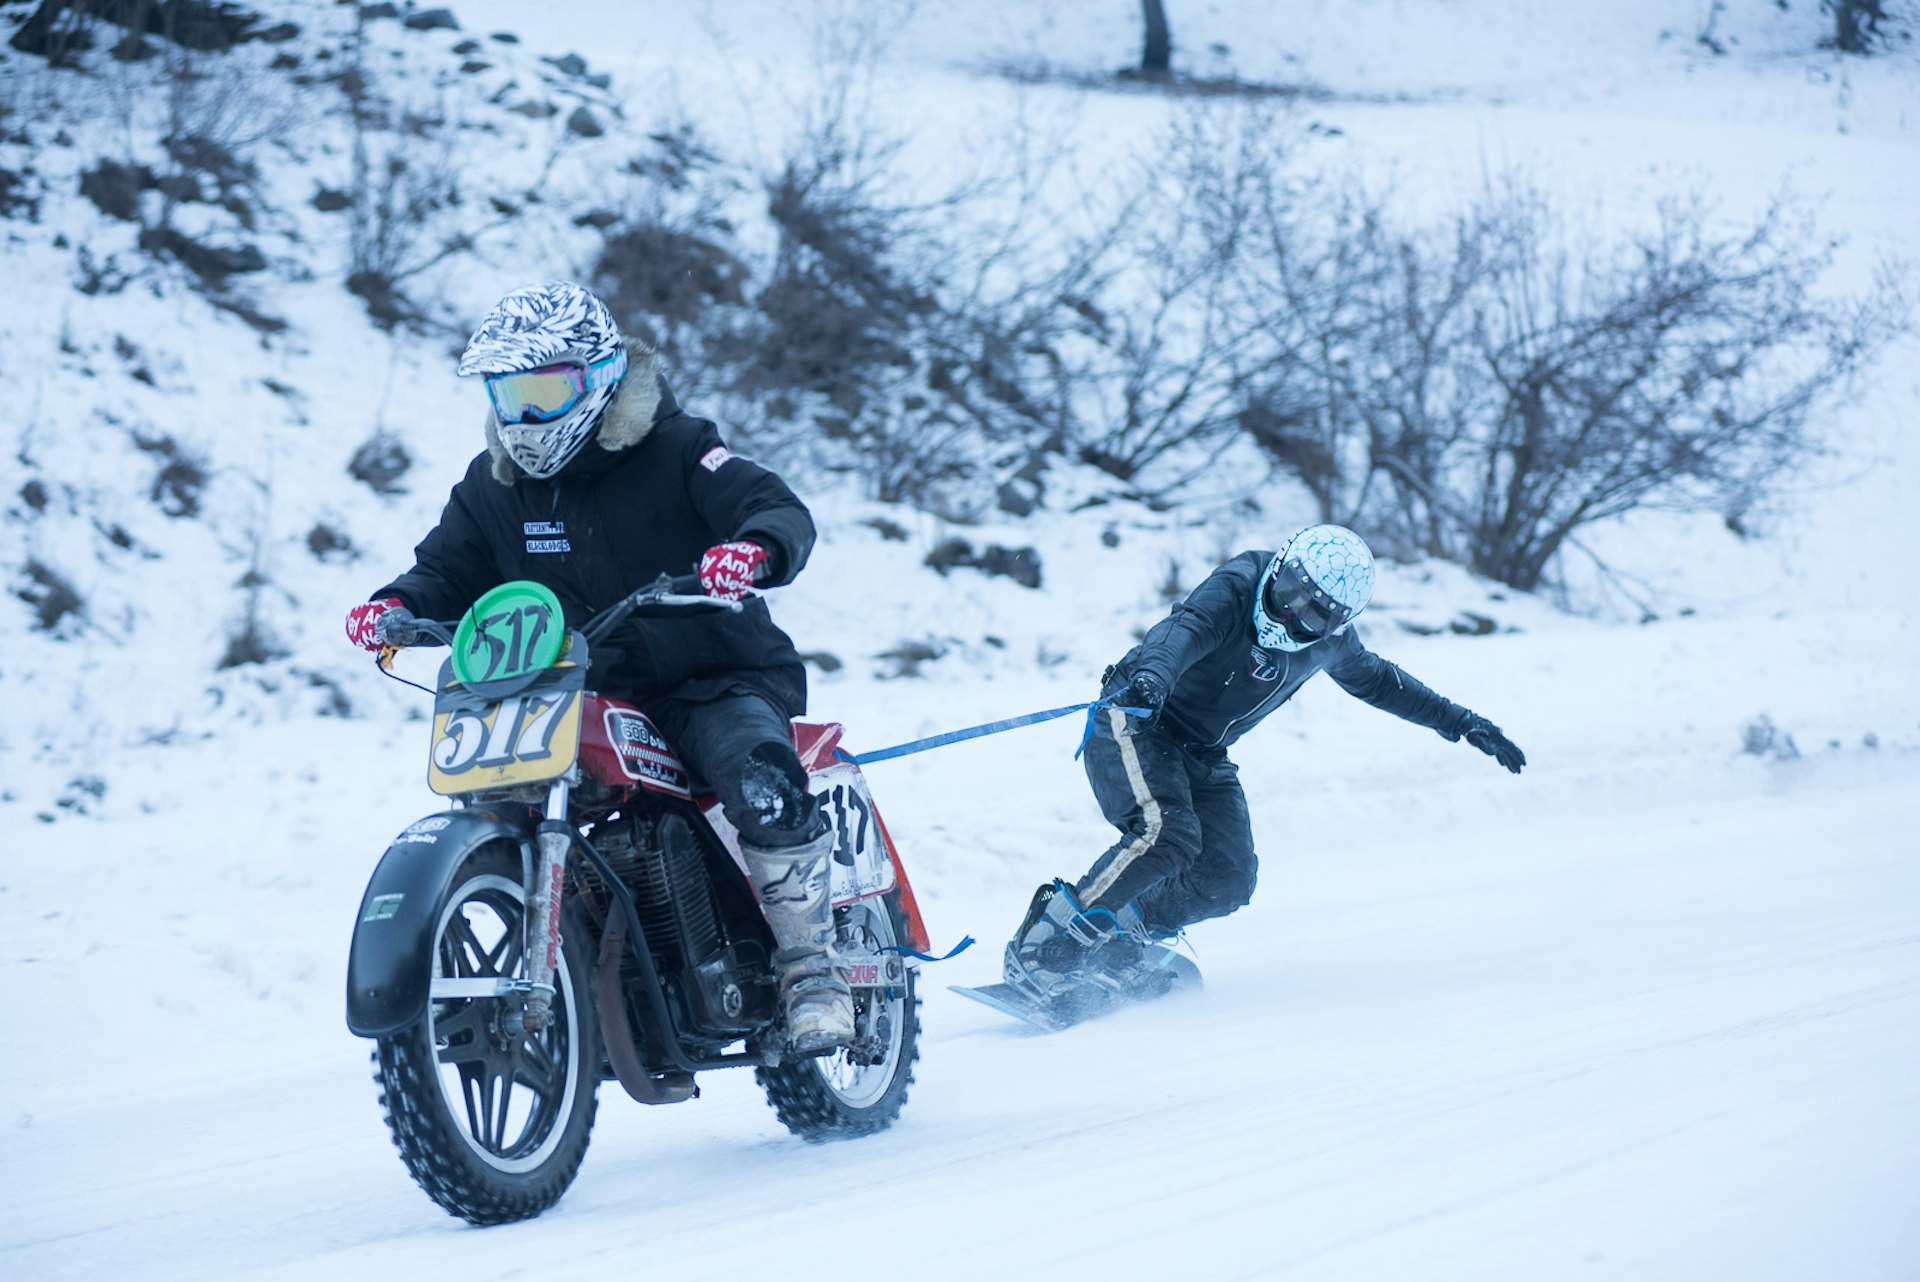 Video: Mad bikers tear it up on the Alpine ice at Snow Quake